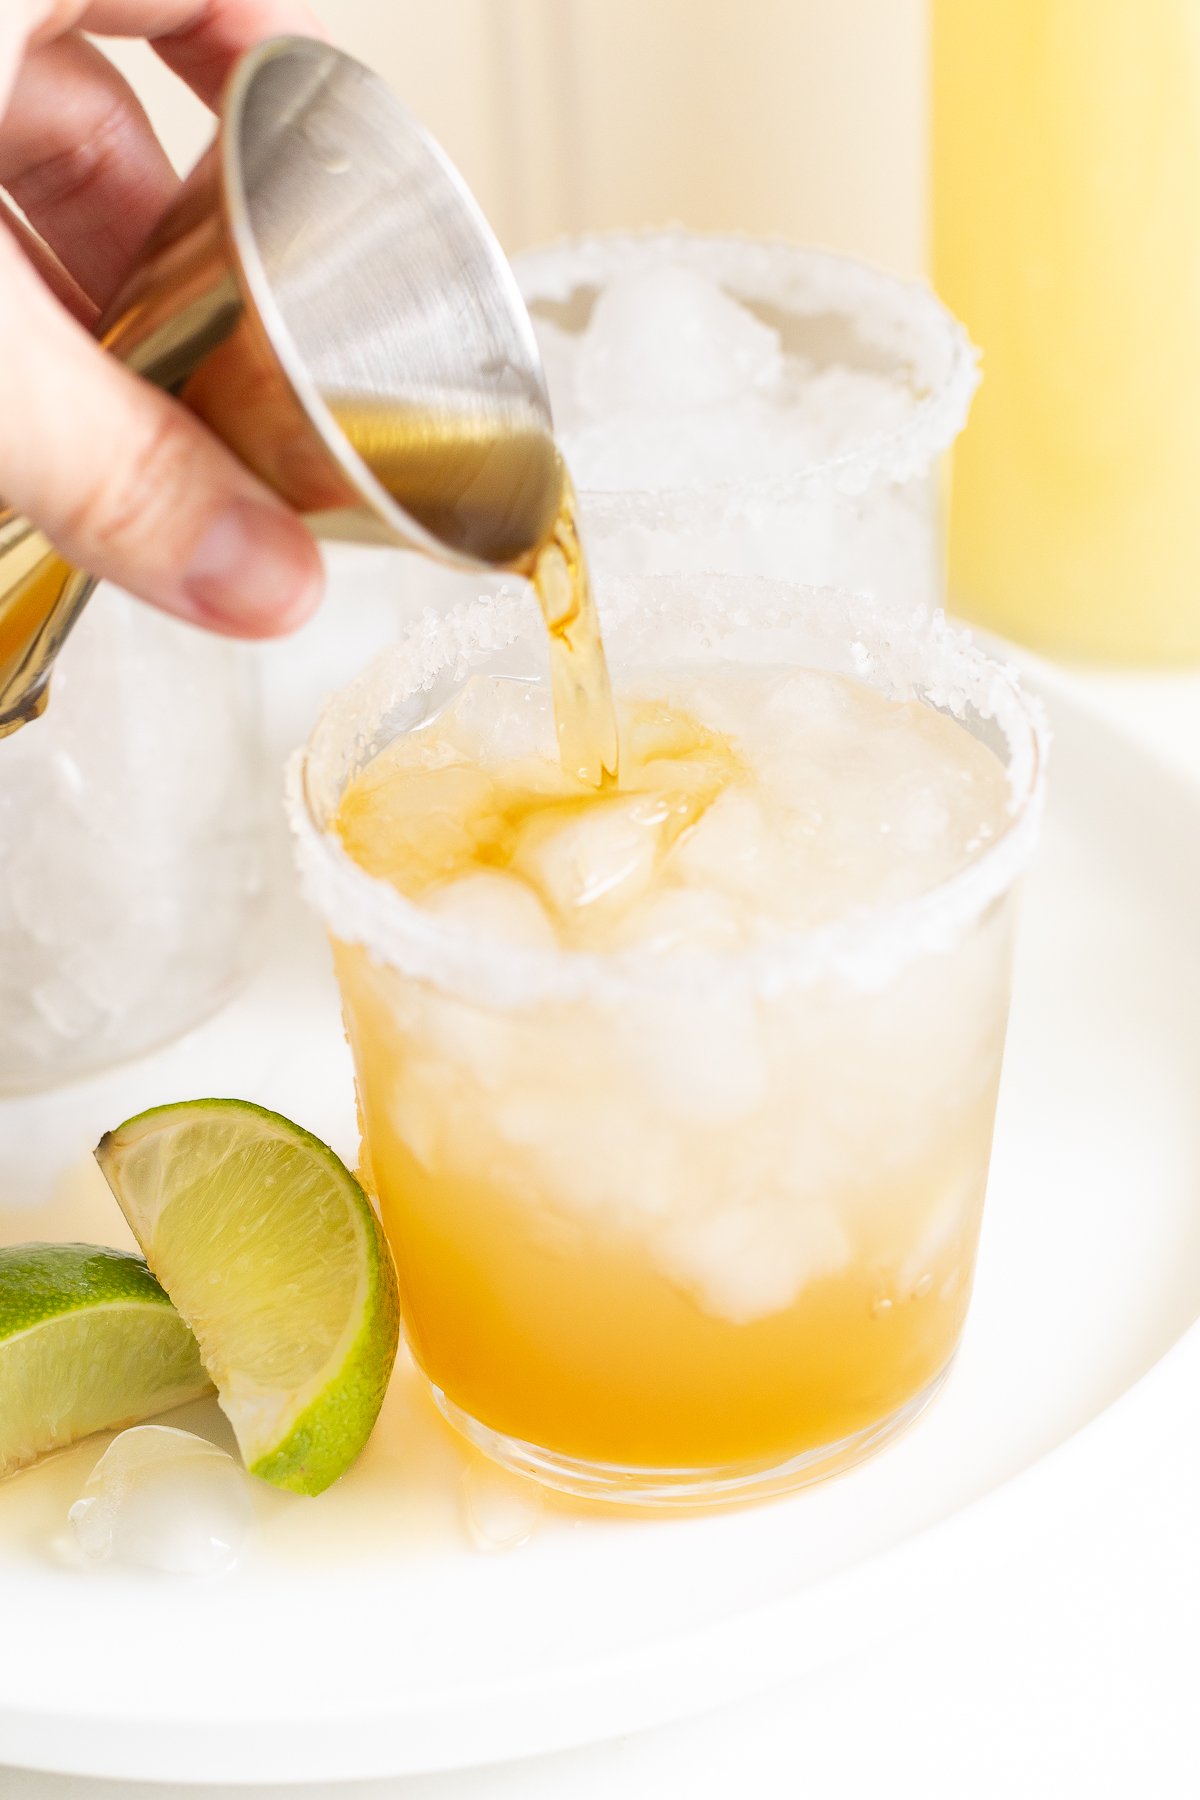 Pouring a golden-colored Cadillac margarita into a salt-rimmed glass with ice and lime wedges nearby.